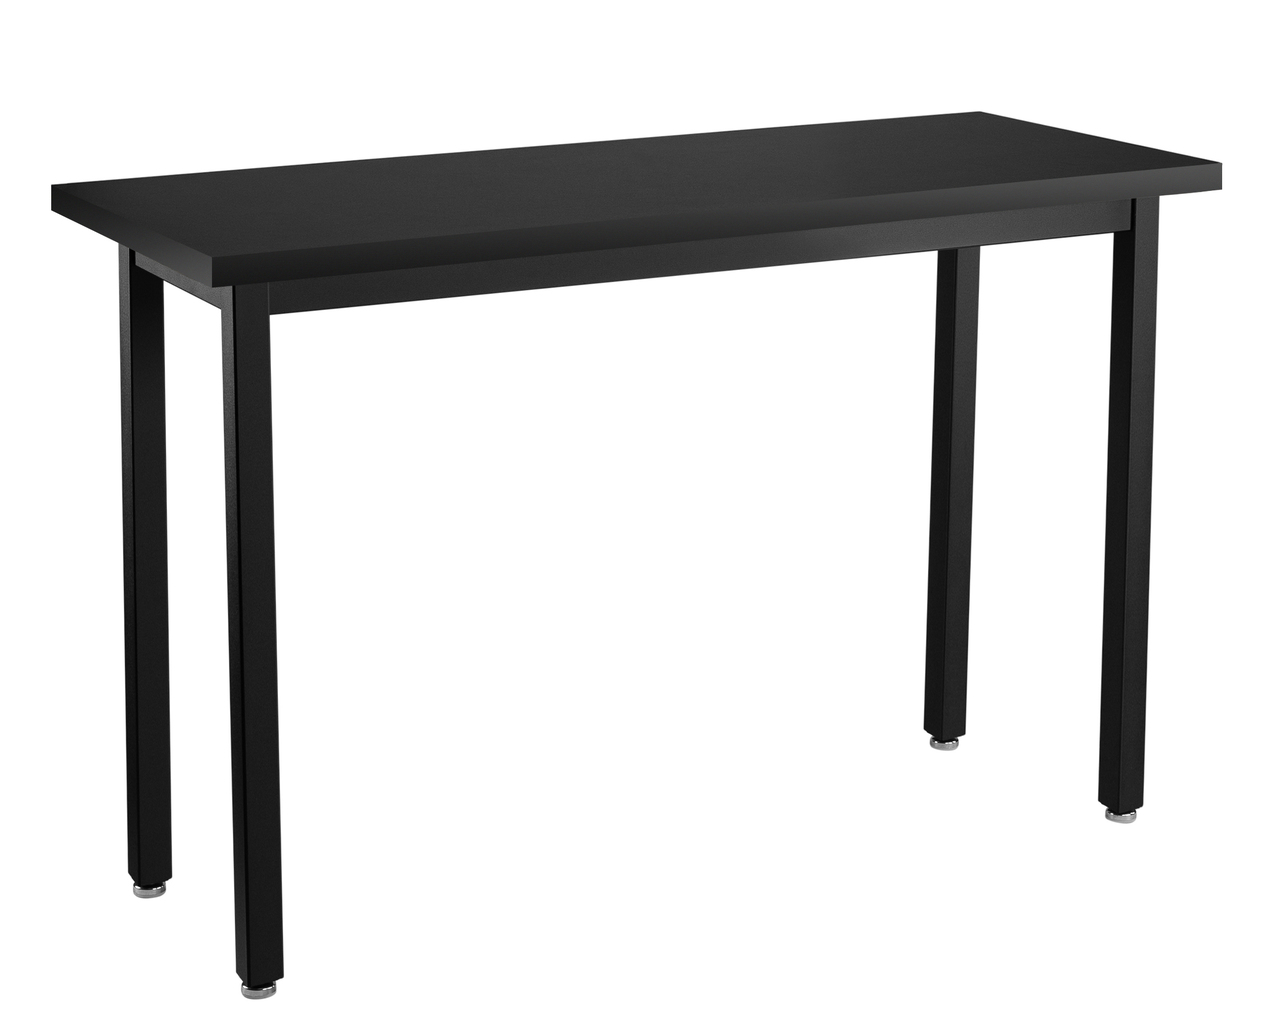 NPS Steel Science Lab Table -  18" x 54" -  Phenolic Top - Black Surface Color